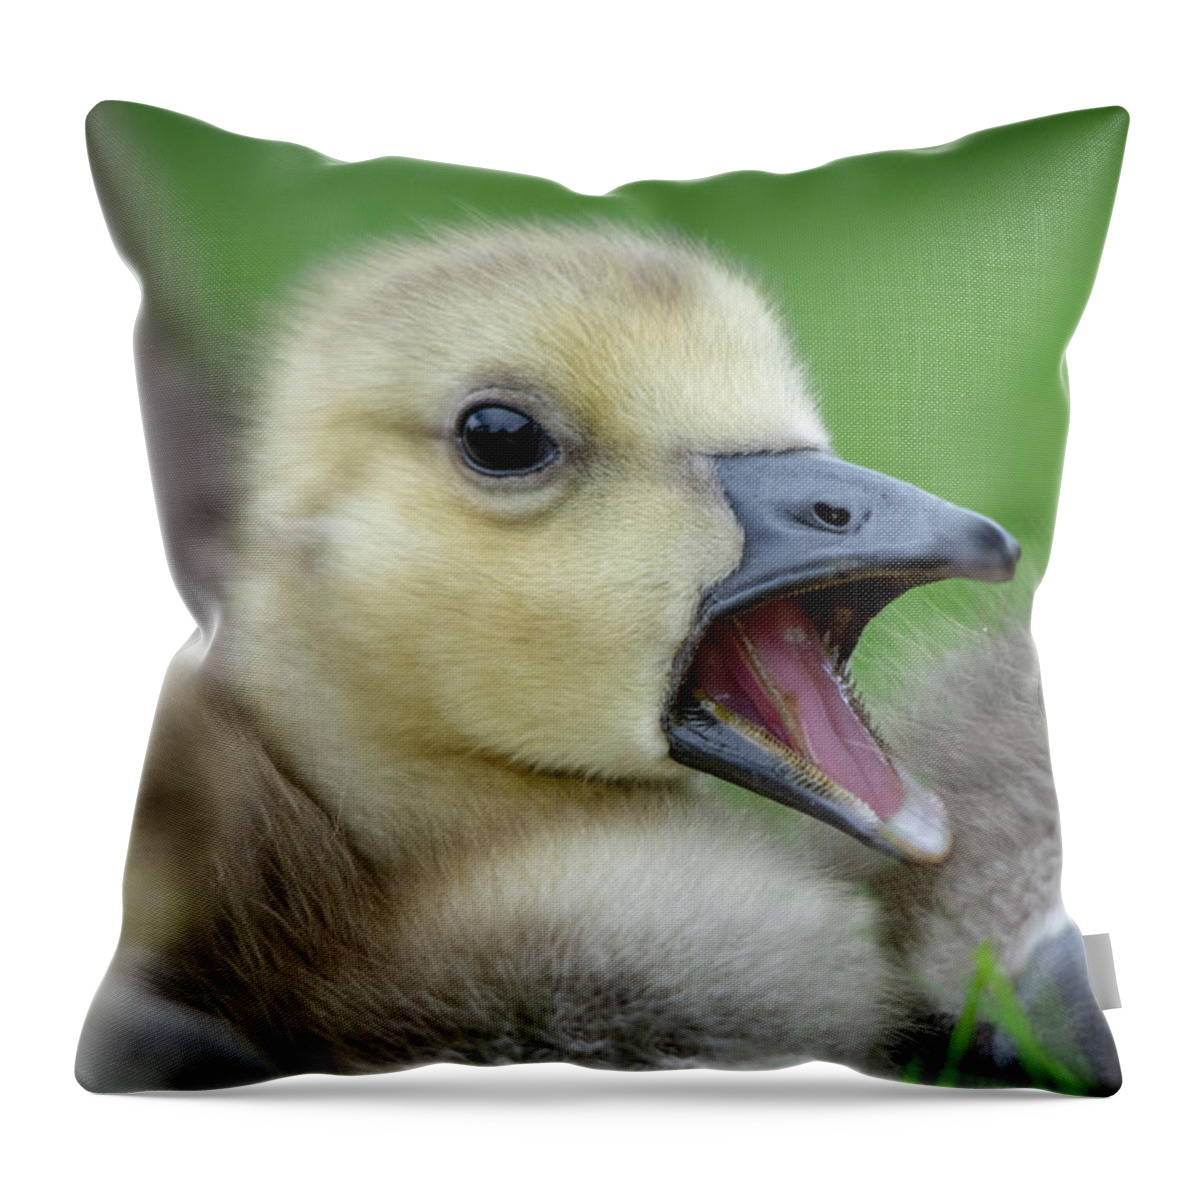 Gosling Throw Pillow featuring the photograph Young Gosling 1 by Gareth Parkes